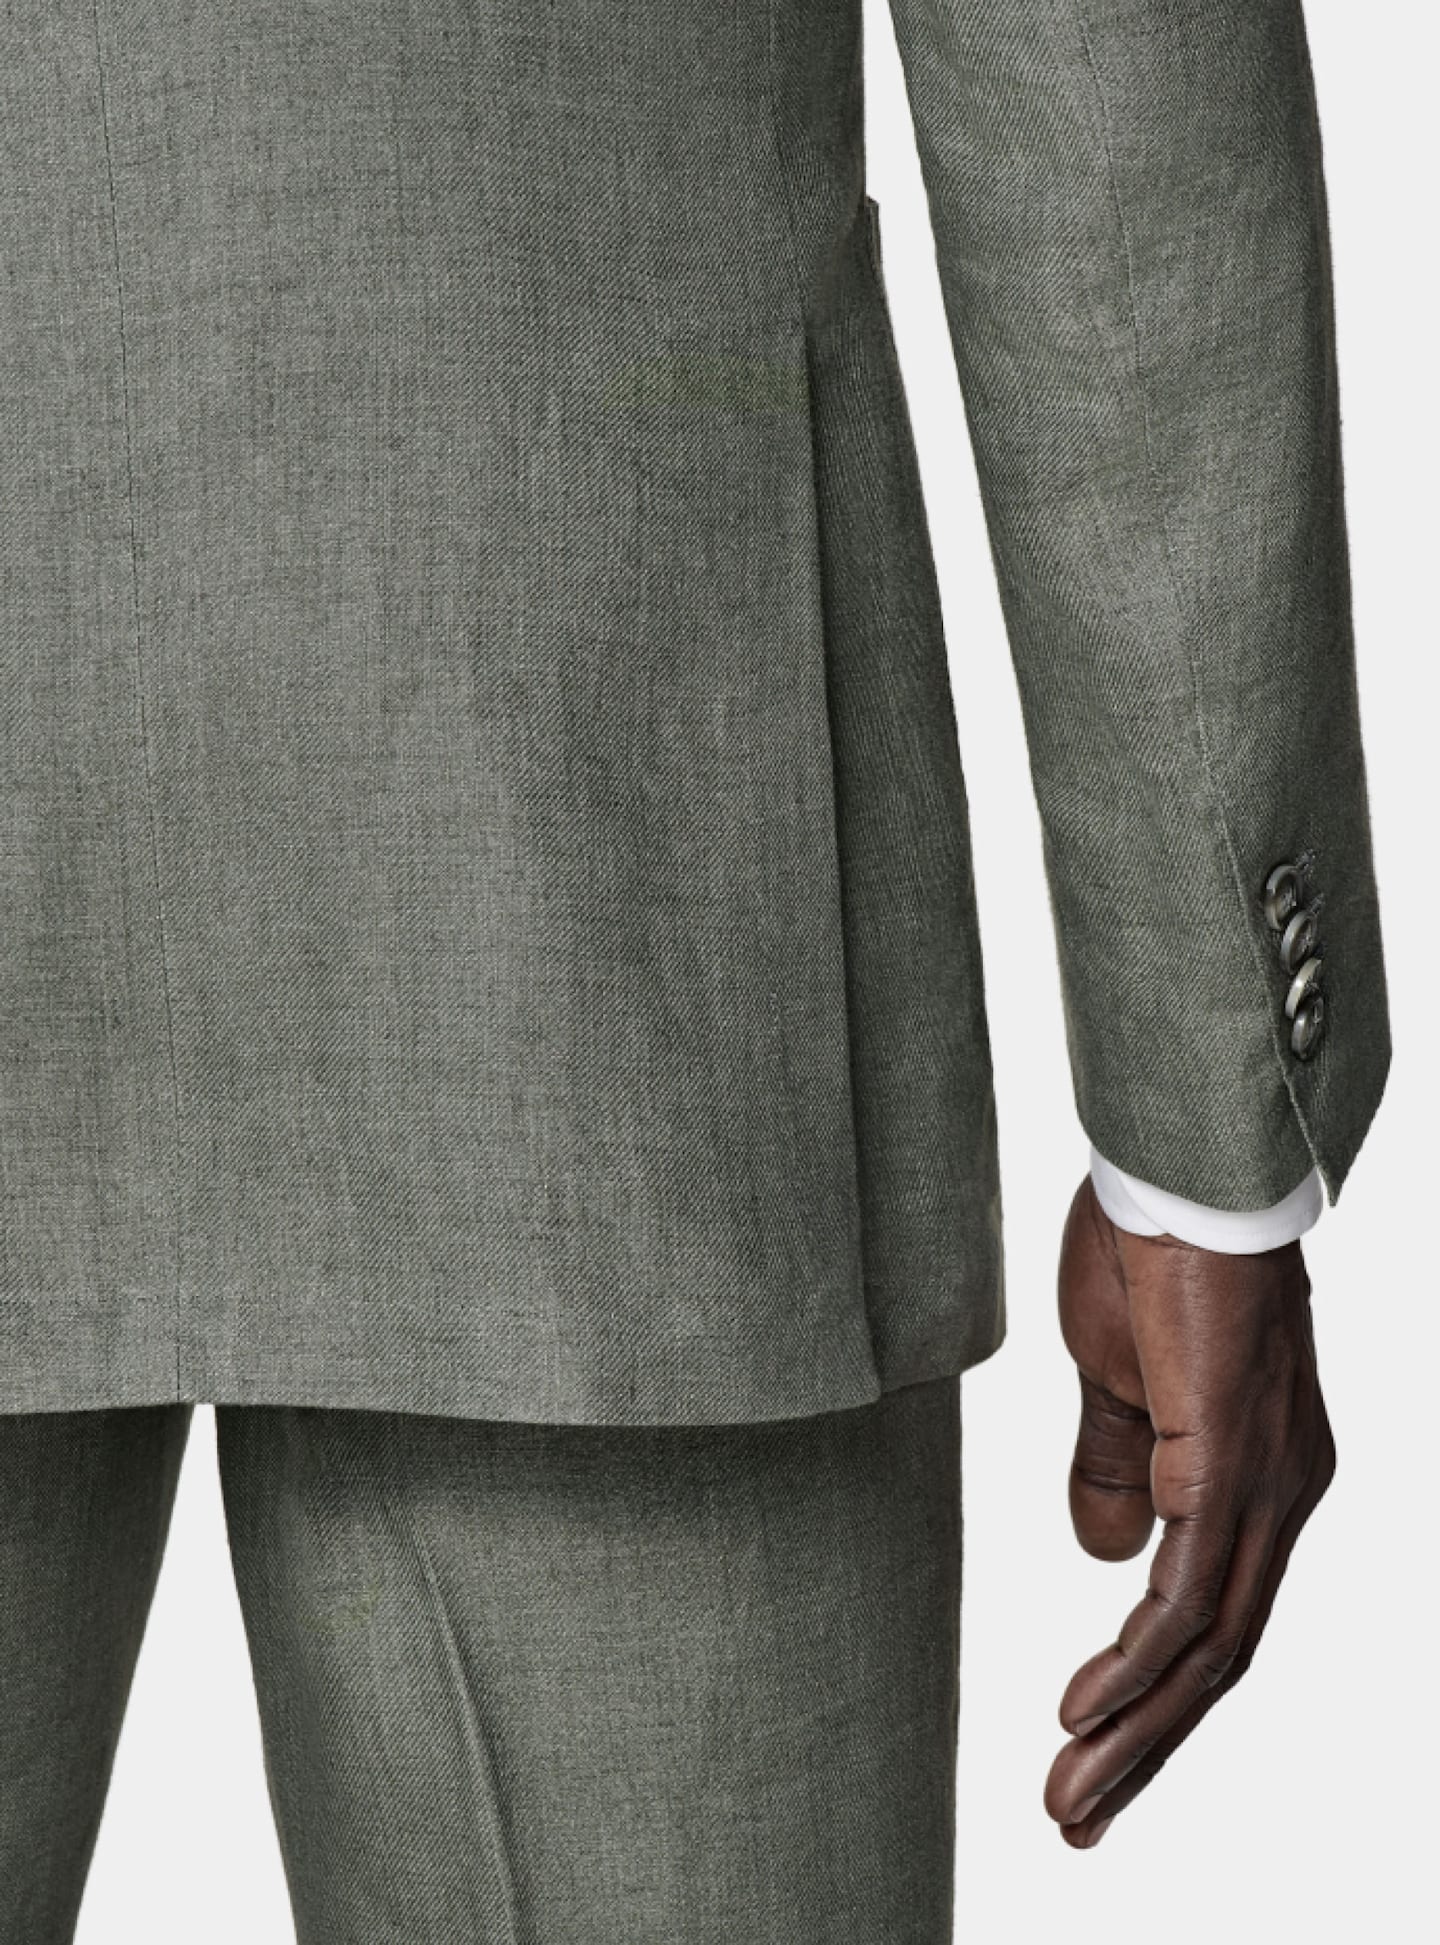 Detail of back of green suit.